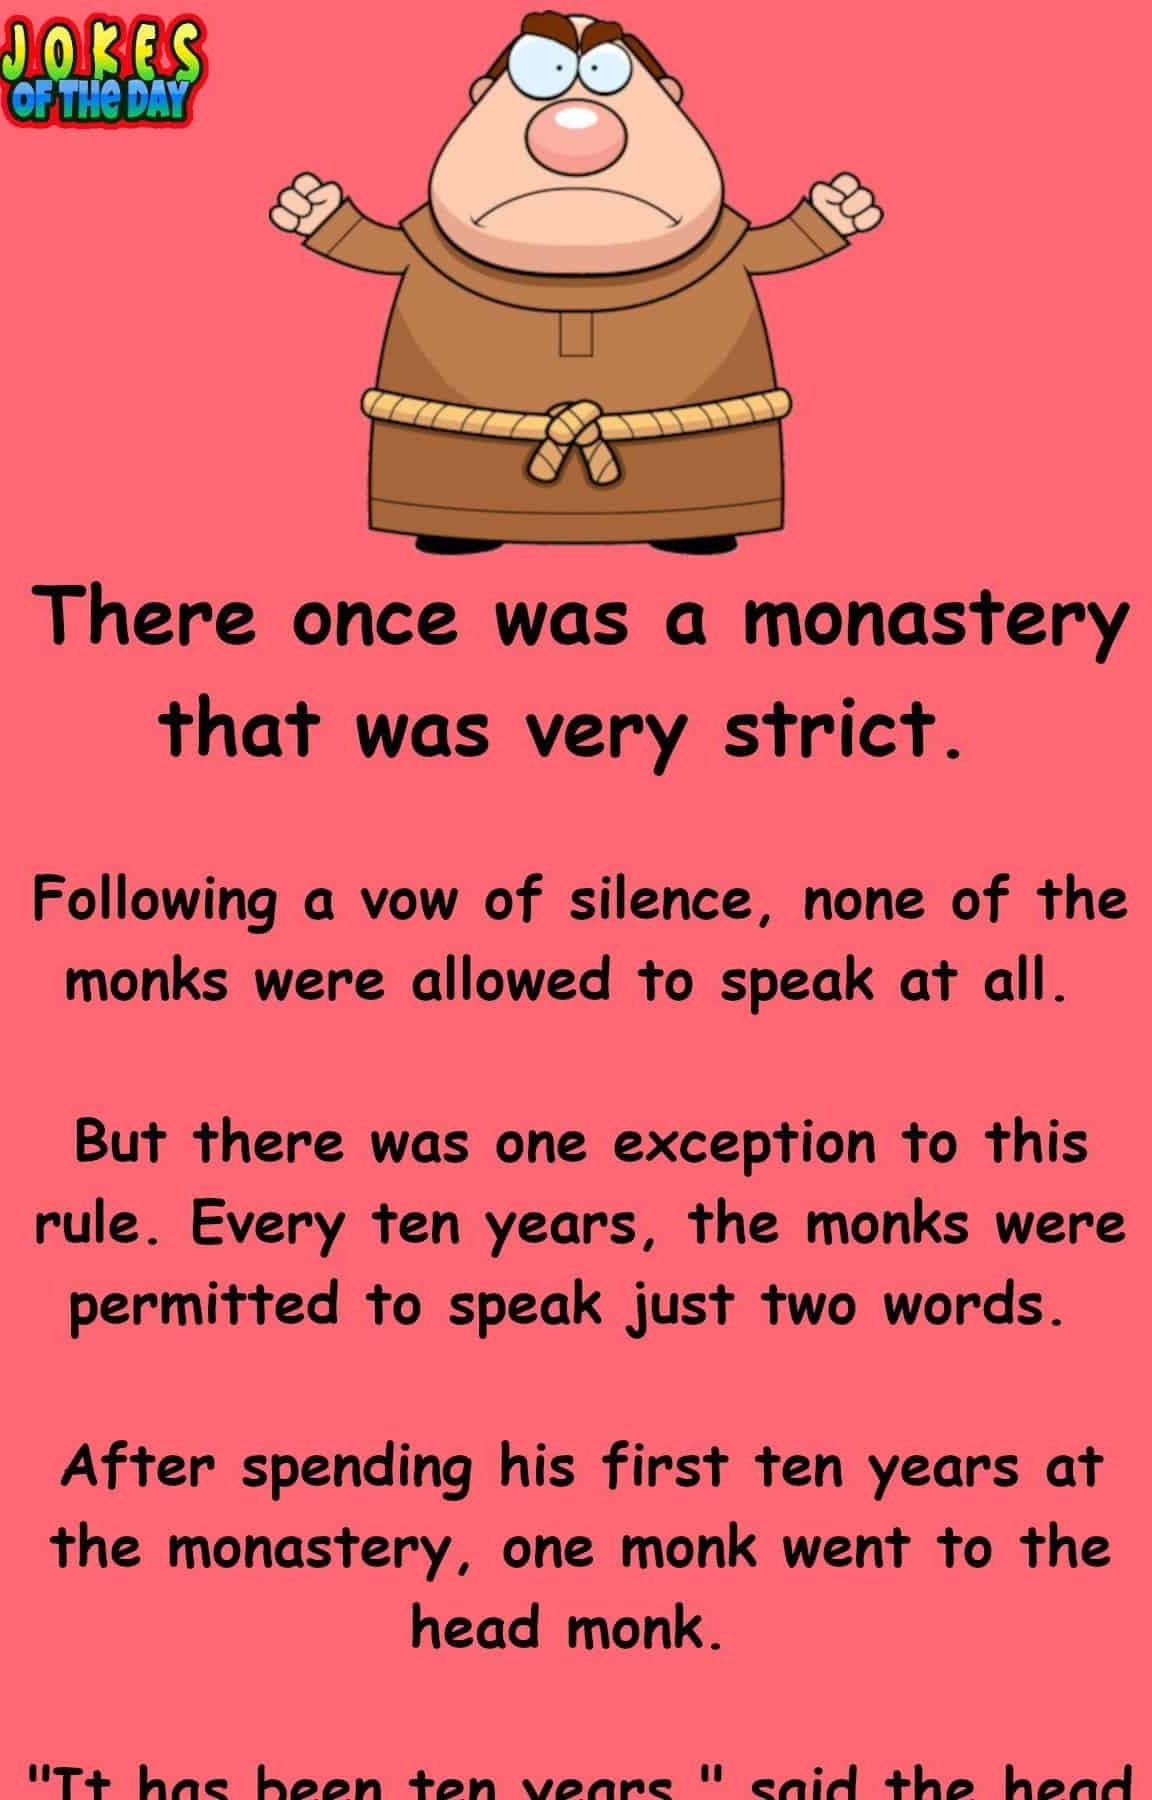 Jokesoftheday com - Funny Monk Joke - There once was a monastery that was very strict  ‣ Jokes Of The Day 